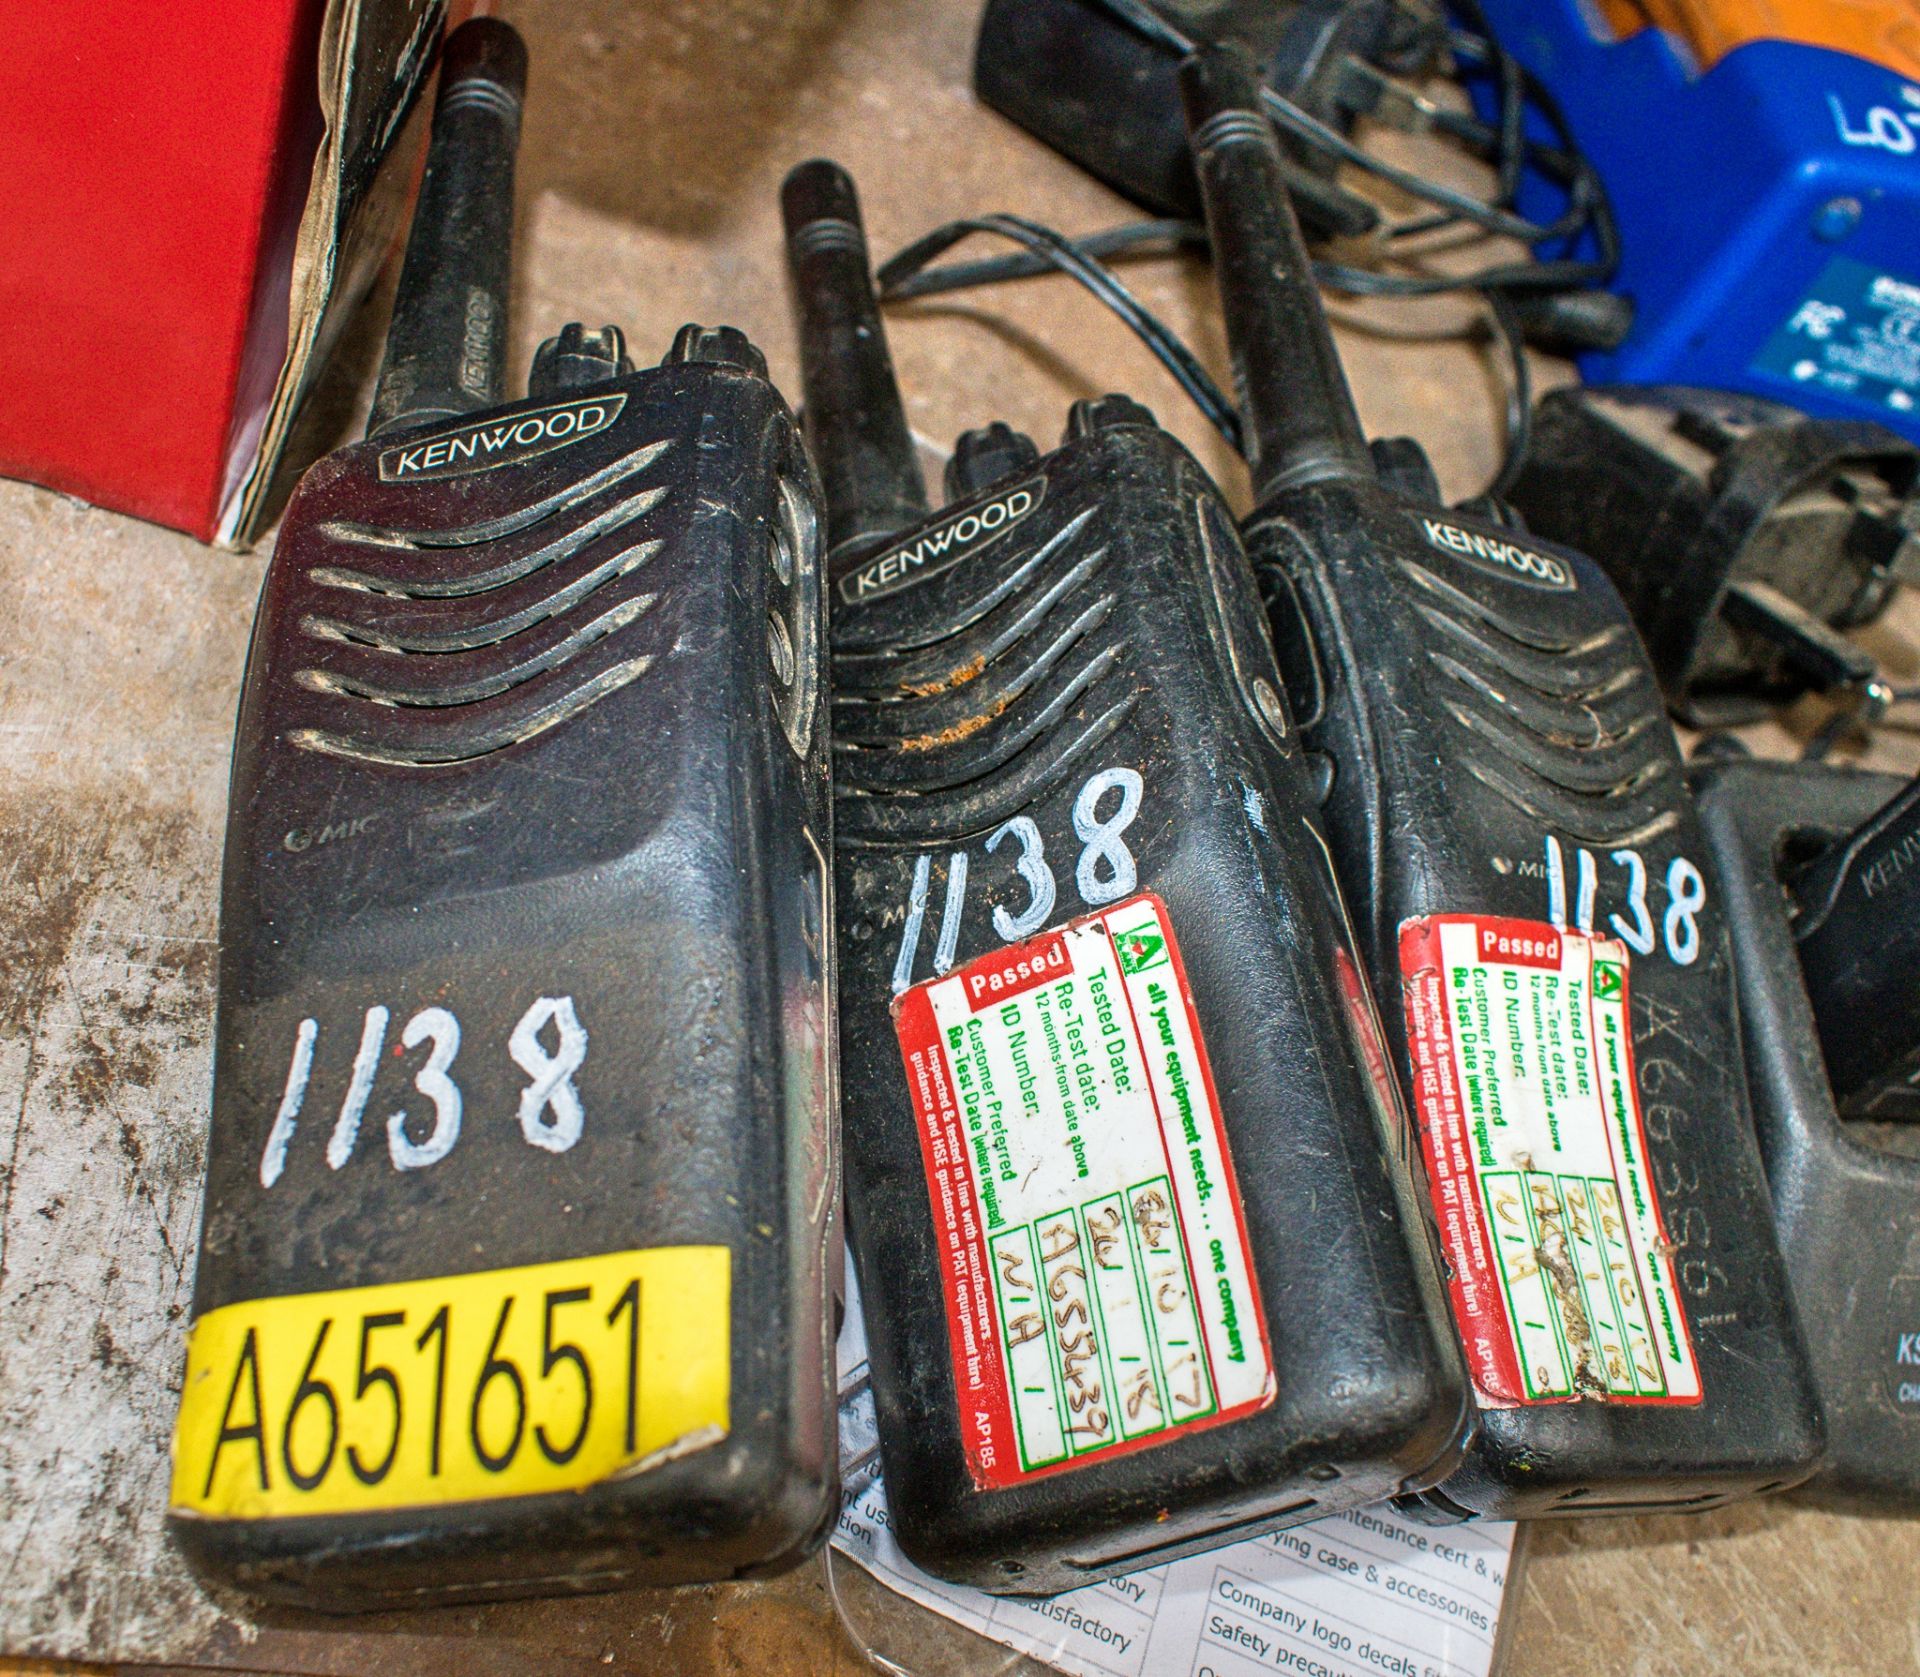 3 - Kenwood 2-way radios A651651/A655439/A663861 ** No chargers **